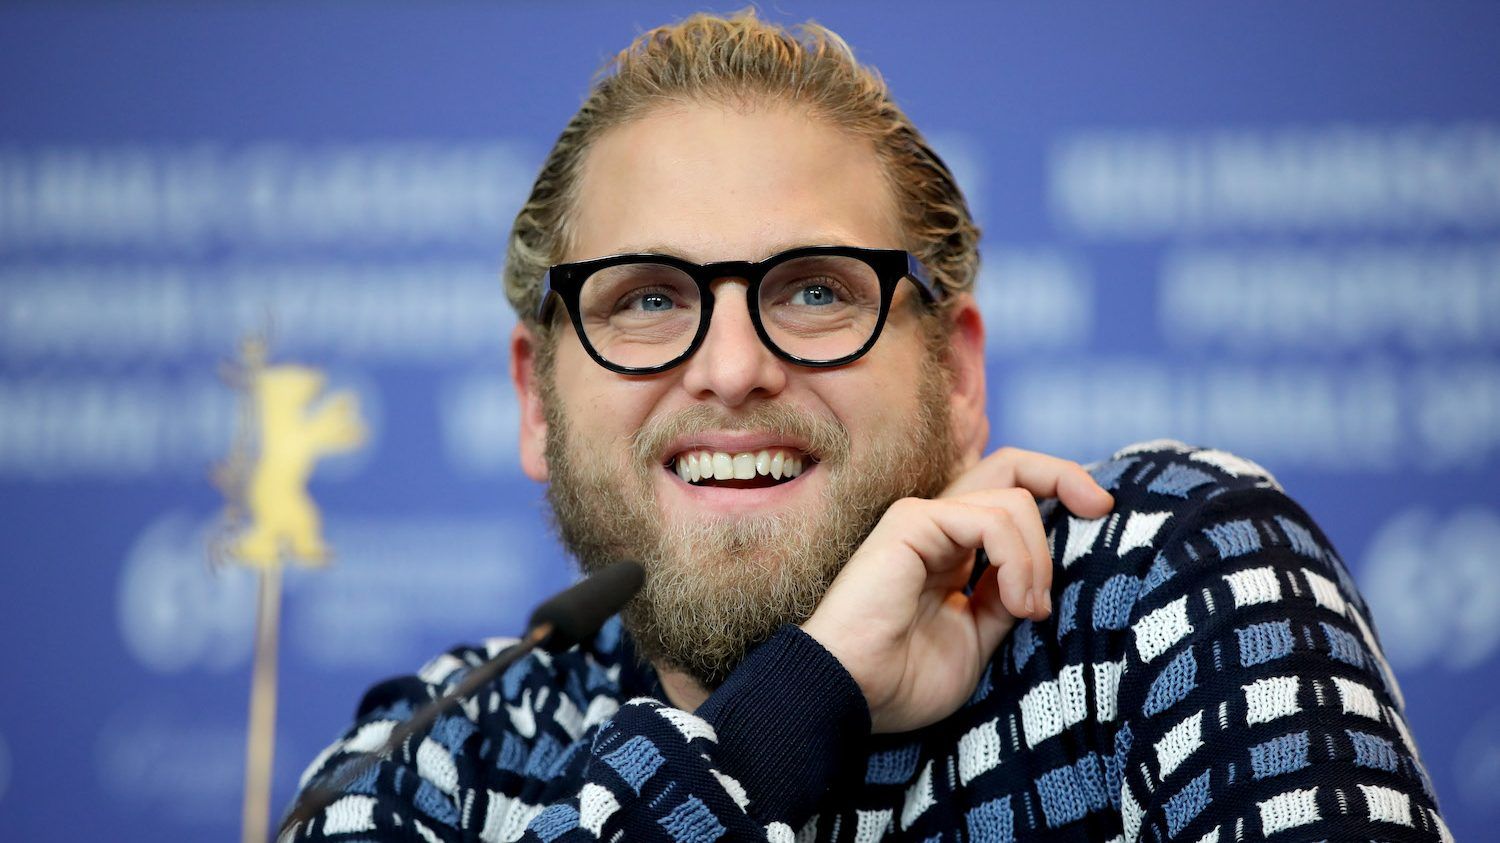 Jonah Hill explains that he is putting his own vulnerability in the spotlight so other people facing mental health challenges will act and get help. (Photo by Andreas Rentz/Getty Images)